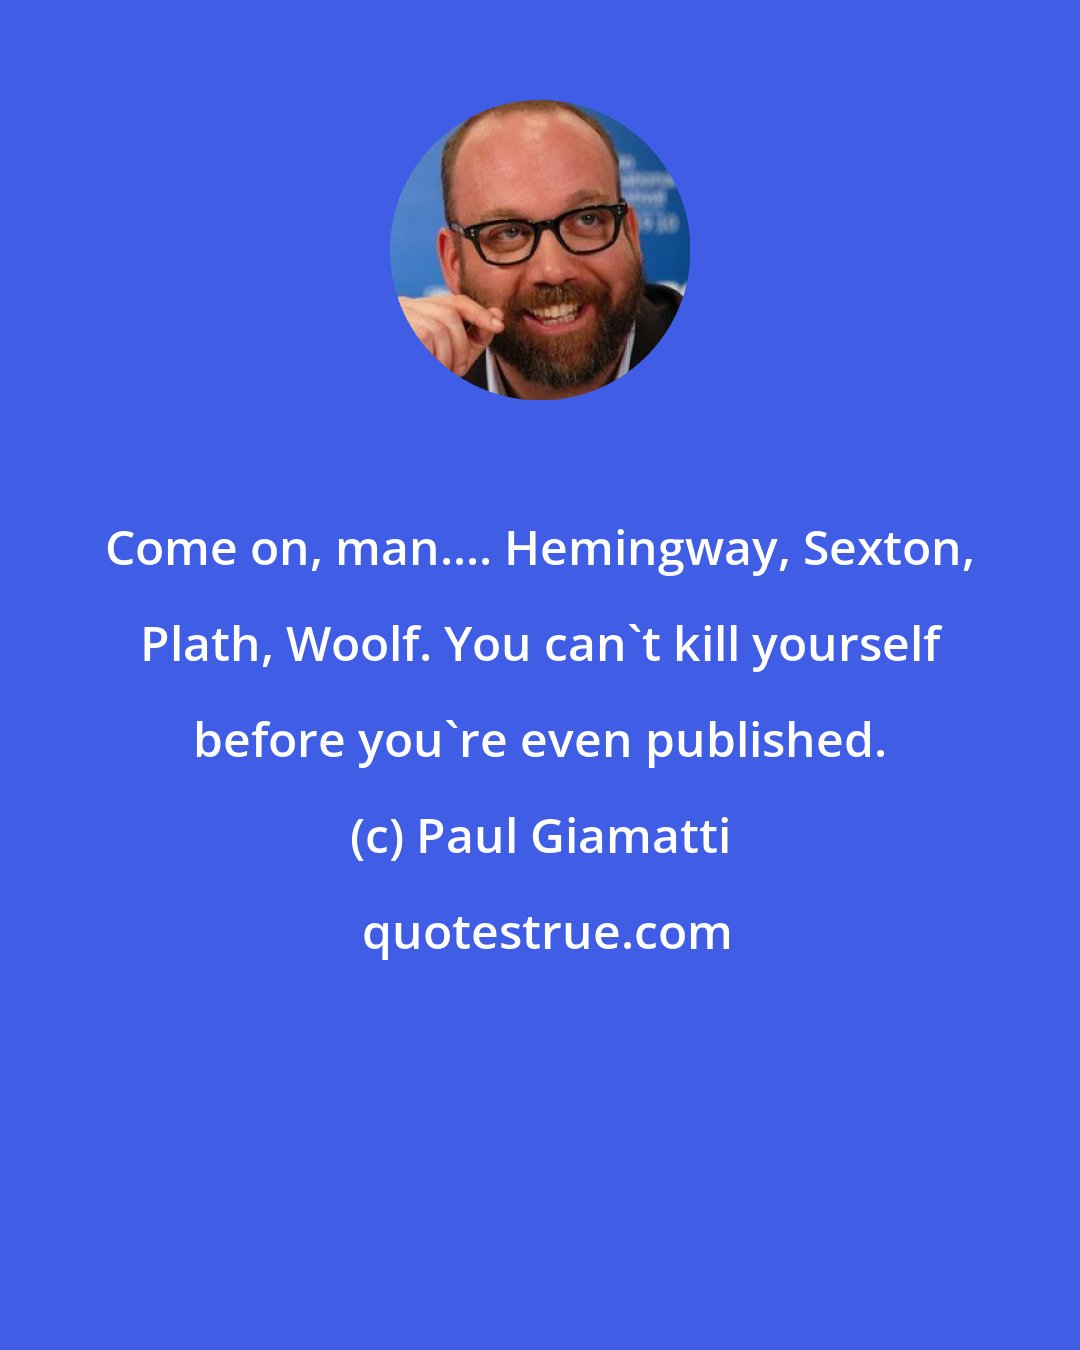 Paul Giamatti: Come on, man.... Hemingway, Sexton, Plath, Woolf. You can't kill yourself before you're even published.